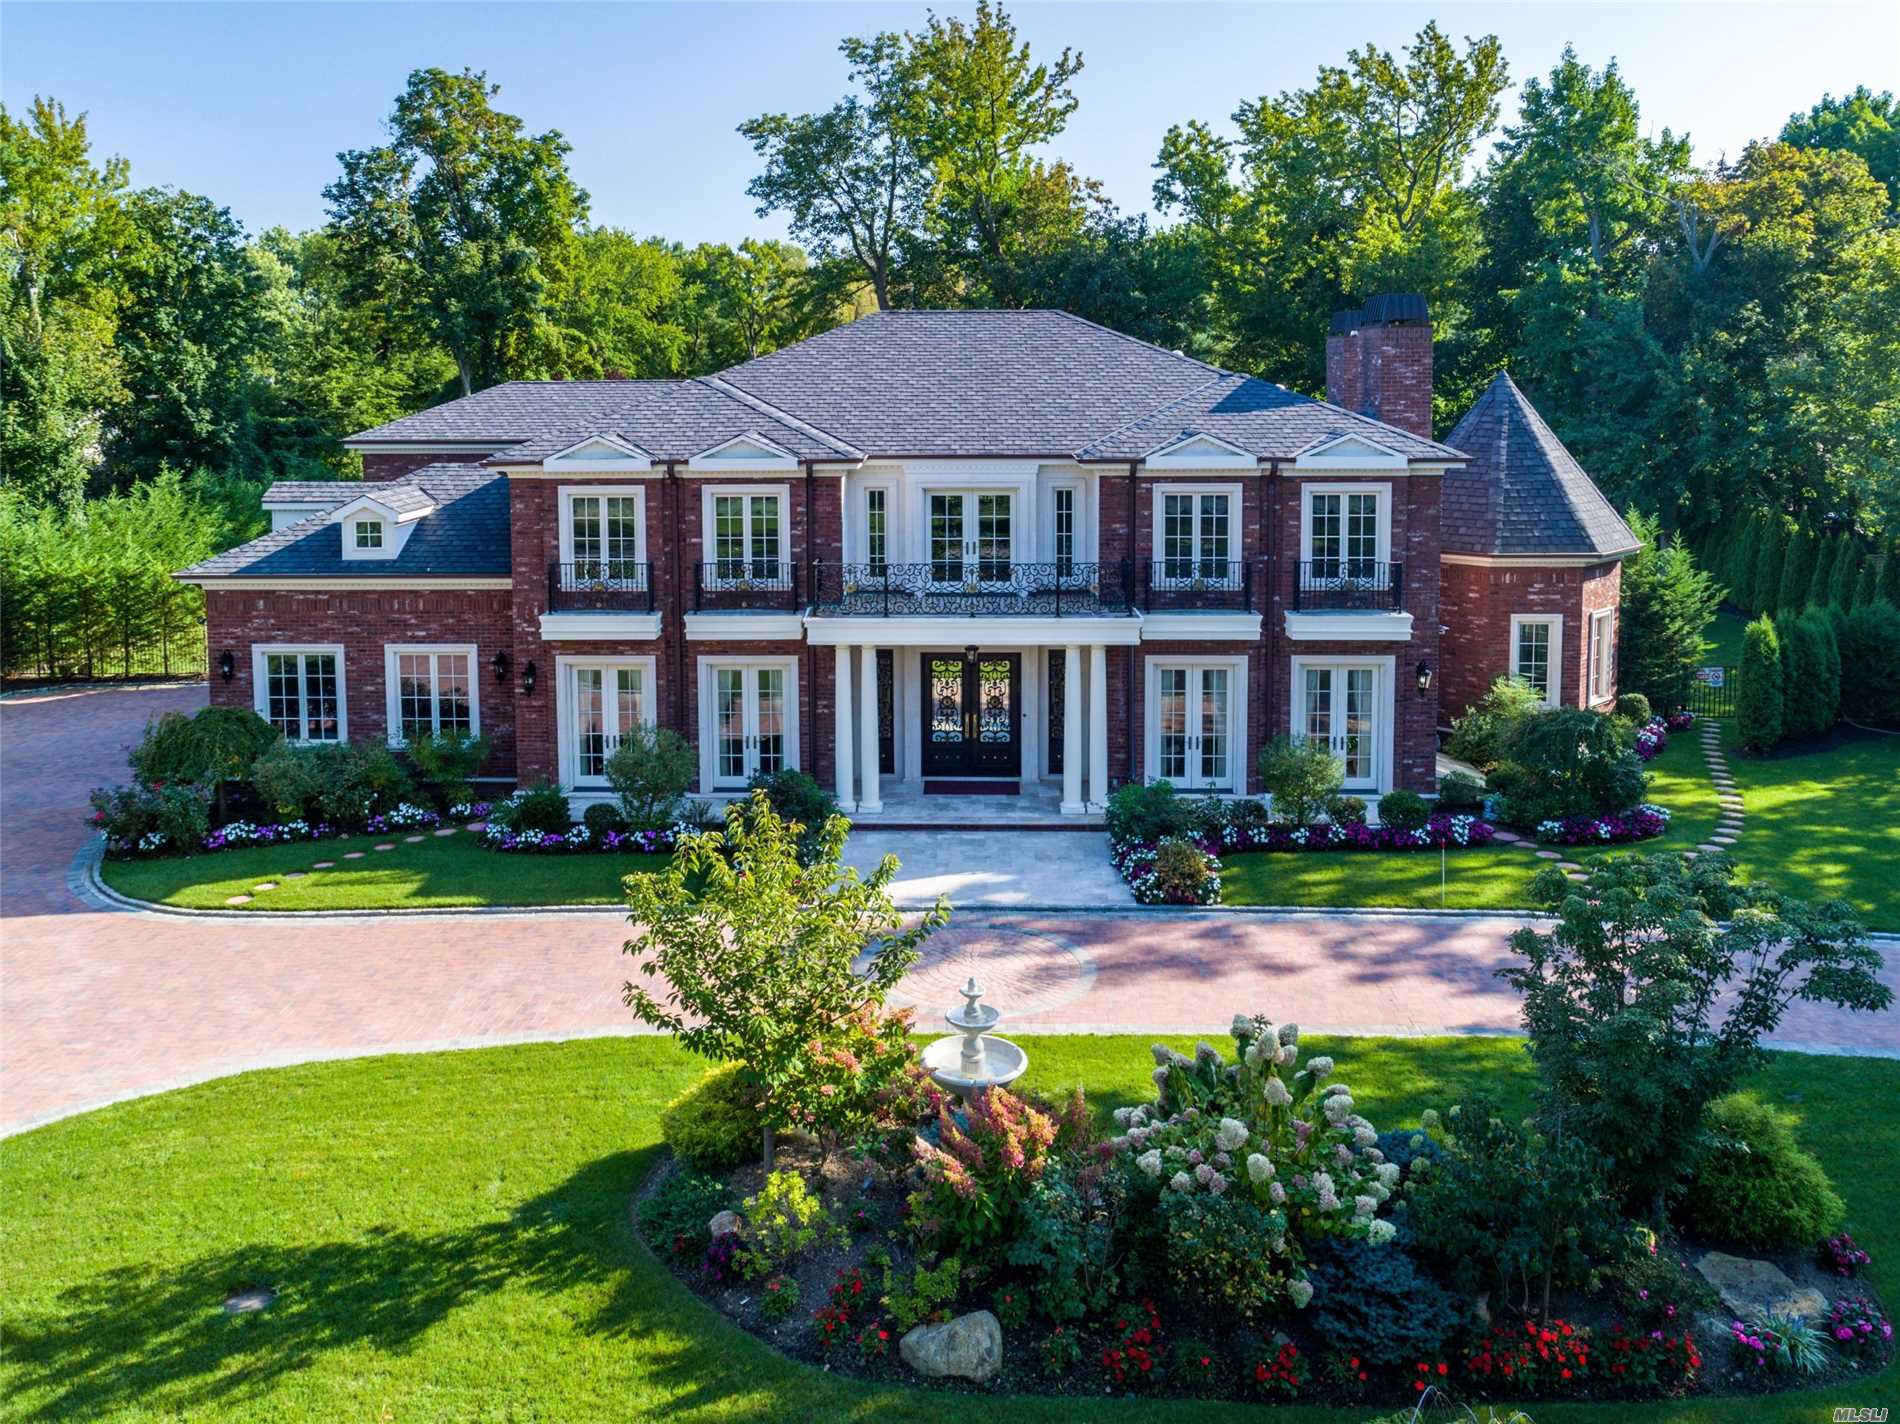 Beauty + Style Abound In This Exquisite 7200 Sq Ft New C//H Colonial Set On Shy Of 1 Picturesque Acre On One Of Kp Most Sought After St.Unique Design Combined With Quality Craftsmanship, Extensive Mill-Work And Lge Pool To Provide The Finest Display Of Indoor Living And Outdoor Entertaining In This Luxury Masterpiece! Large Entertaining Rms, 6 Bedrms, 6 Baths, .